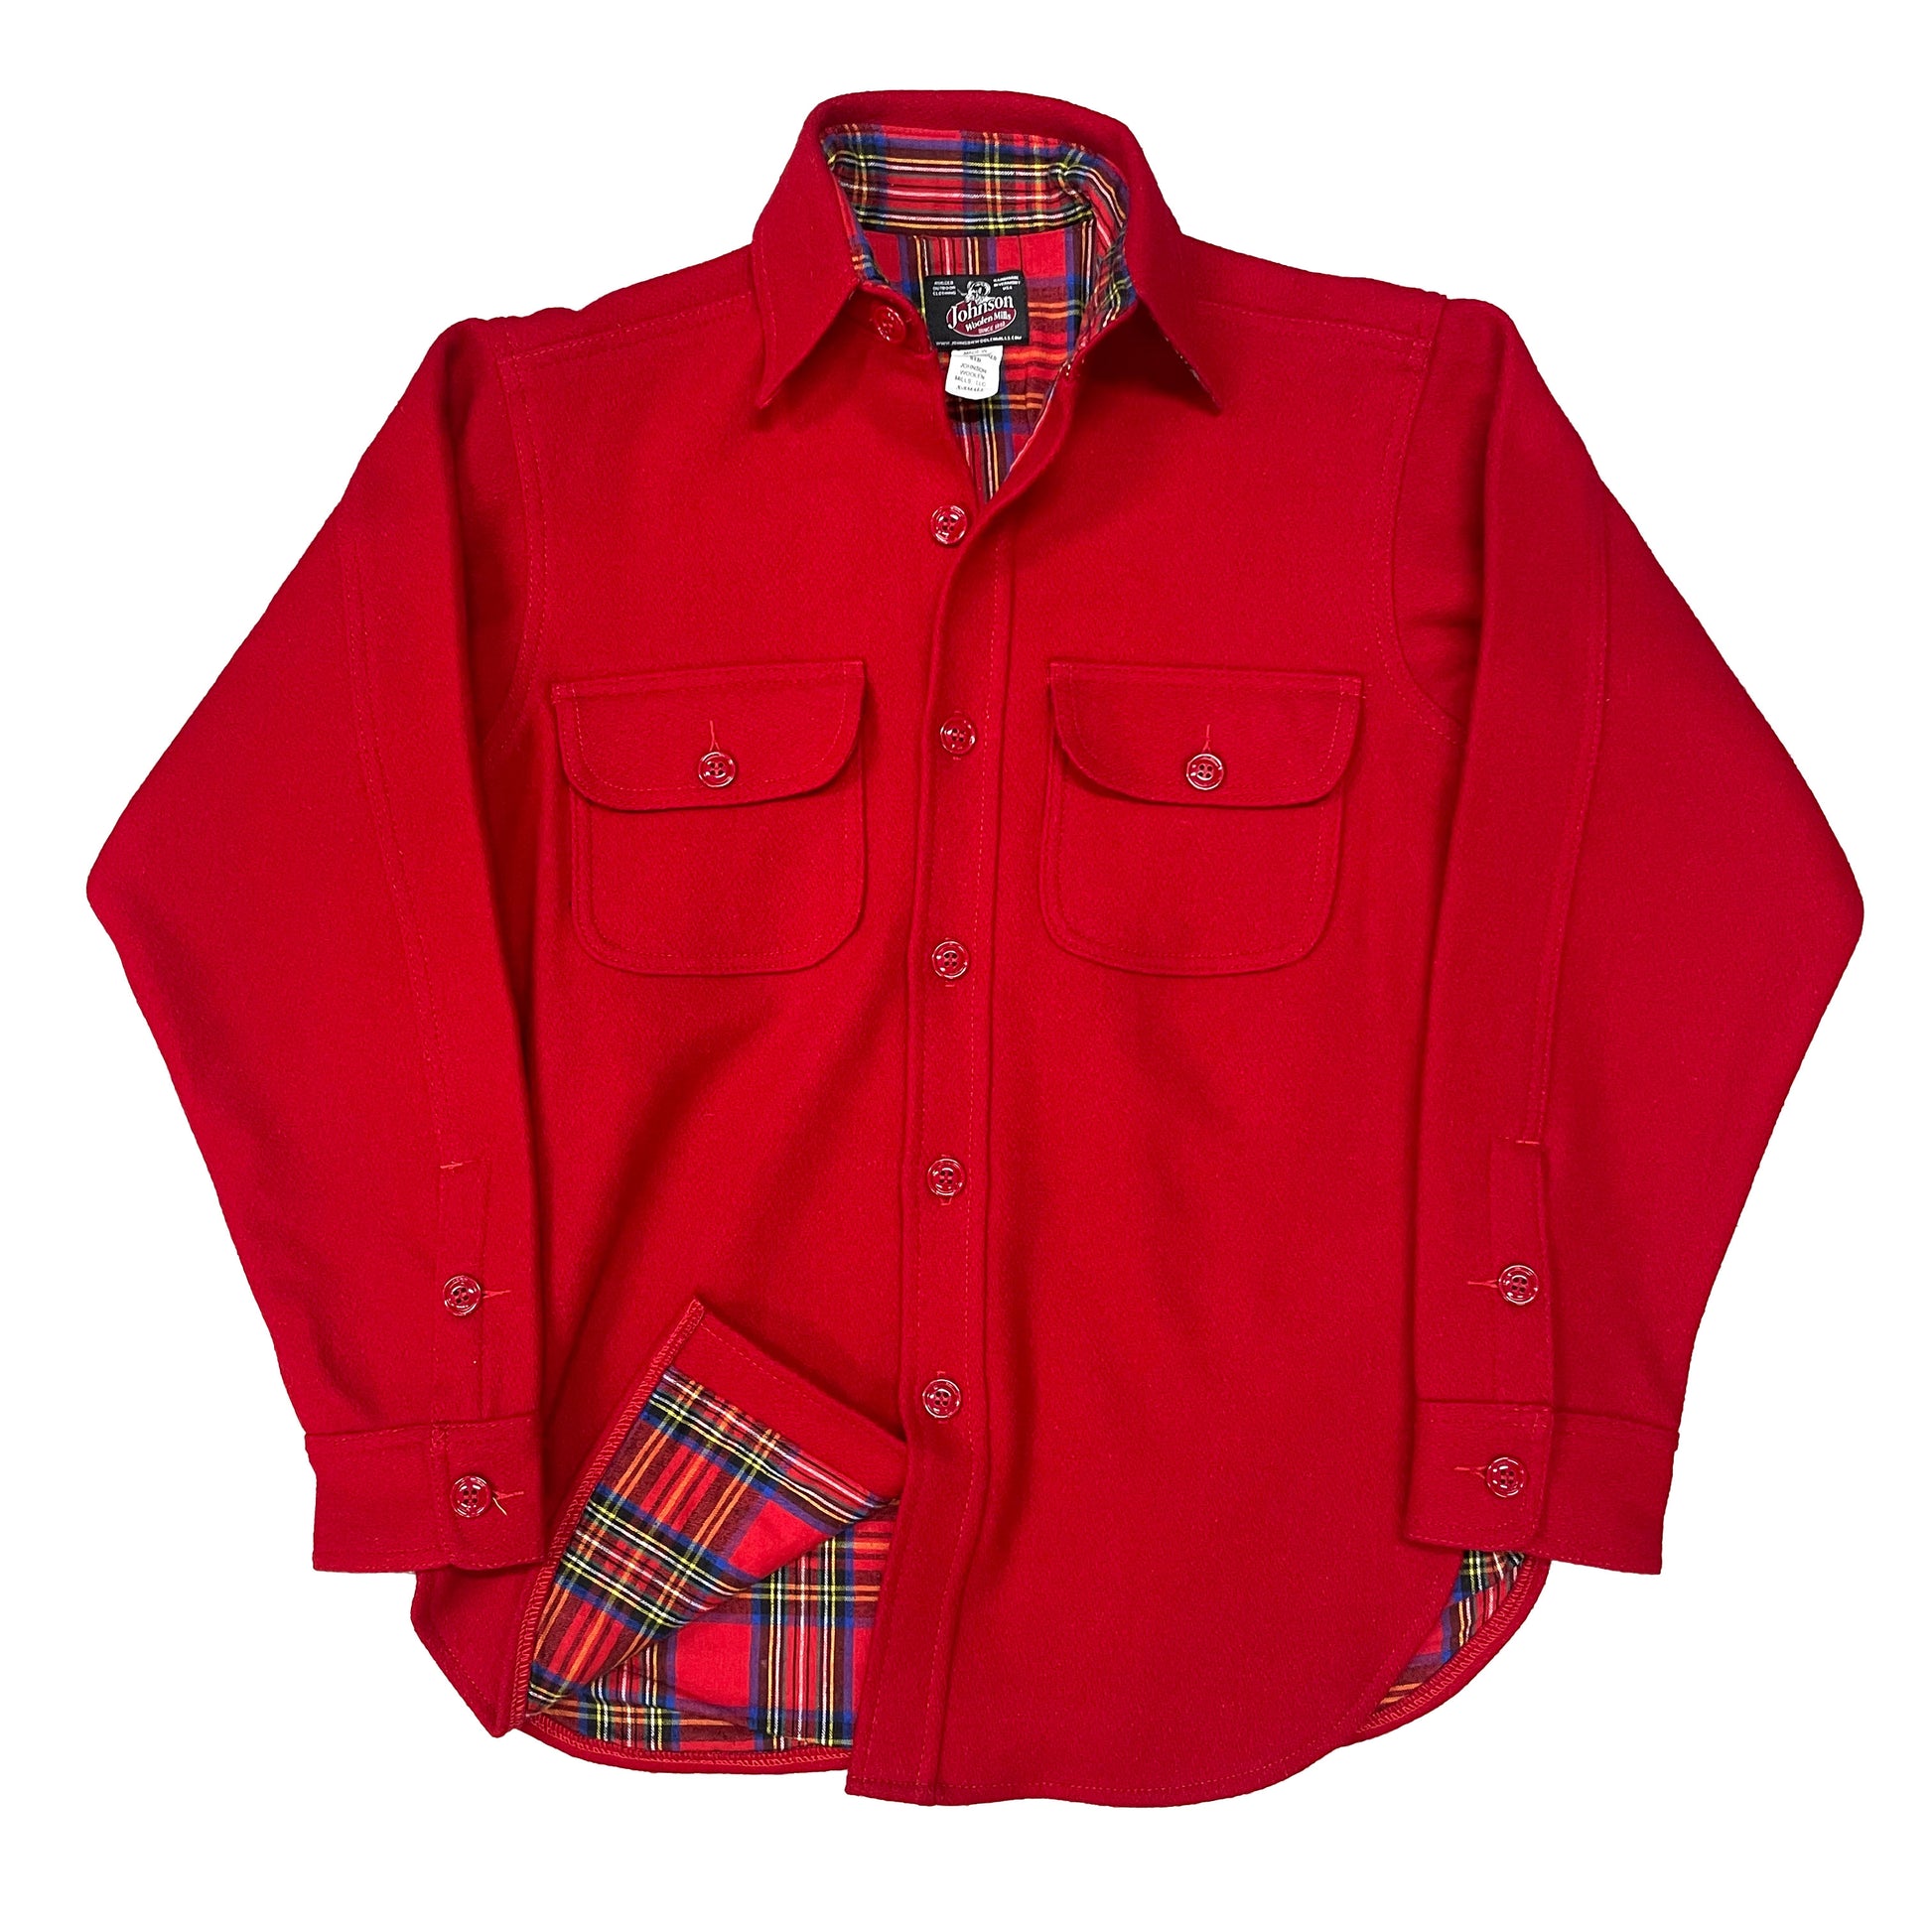 Long Tail Button Down long sleeve shirt with a 6 button front, button cuffs and two front chest pockets. Shown in scarlett red with red, white and blue plaid flannel lining.